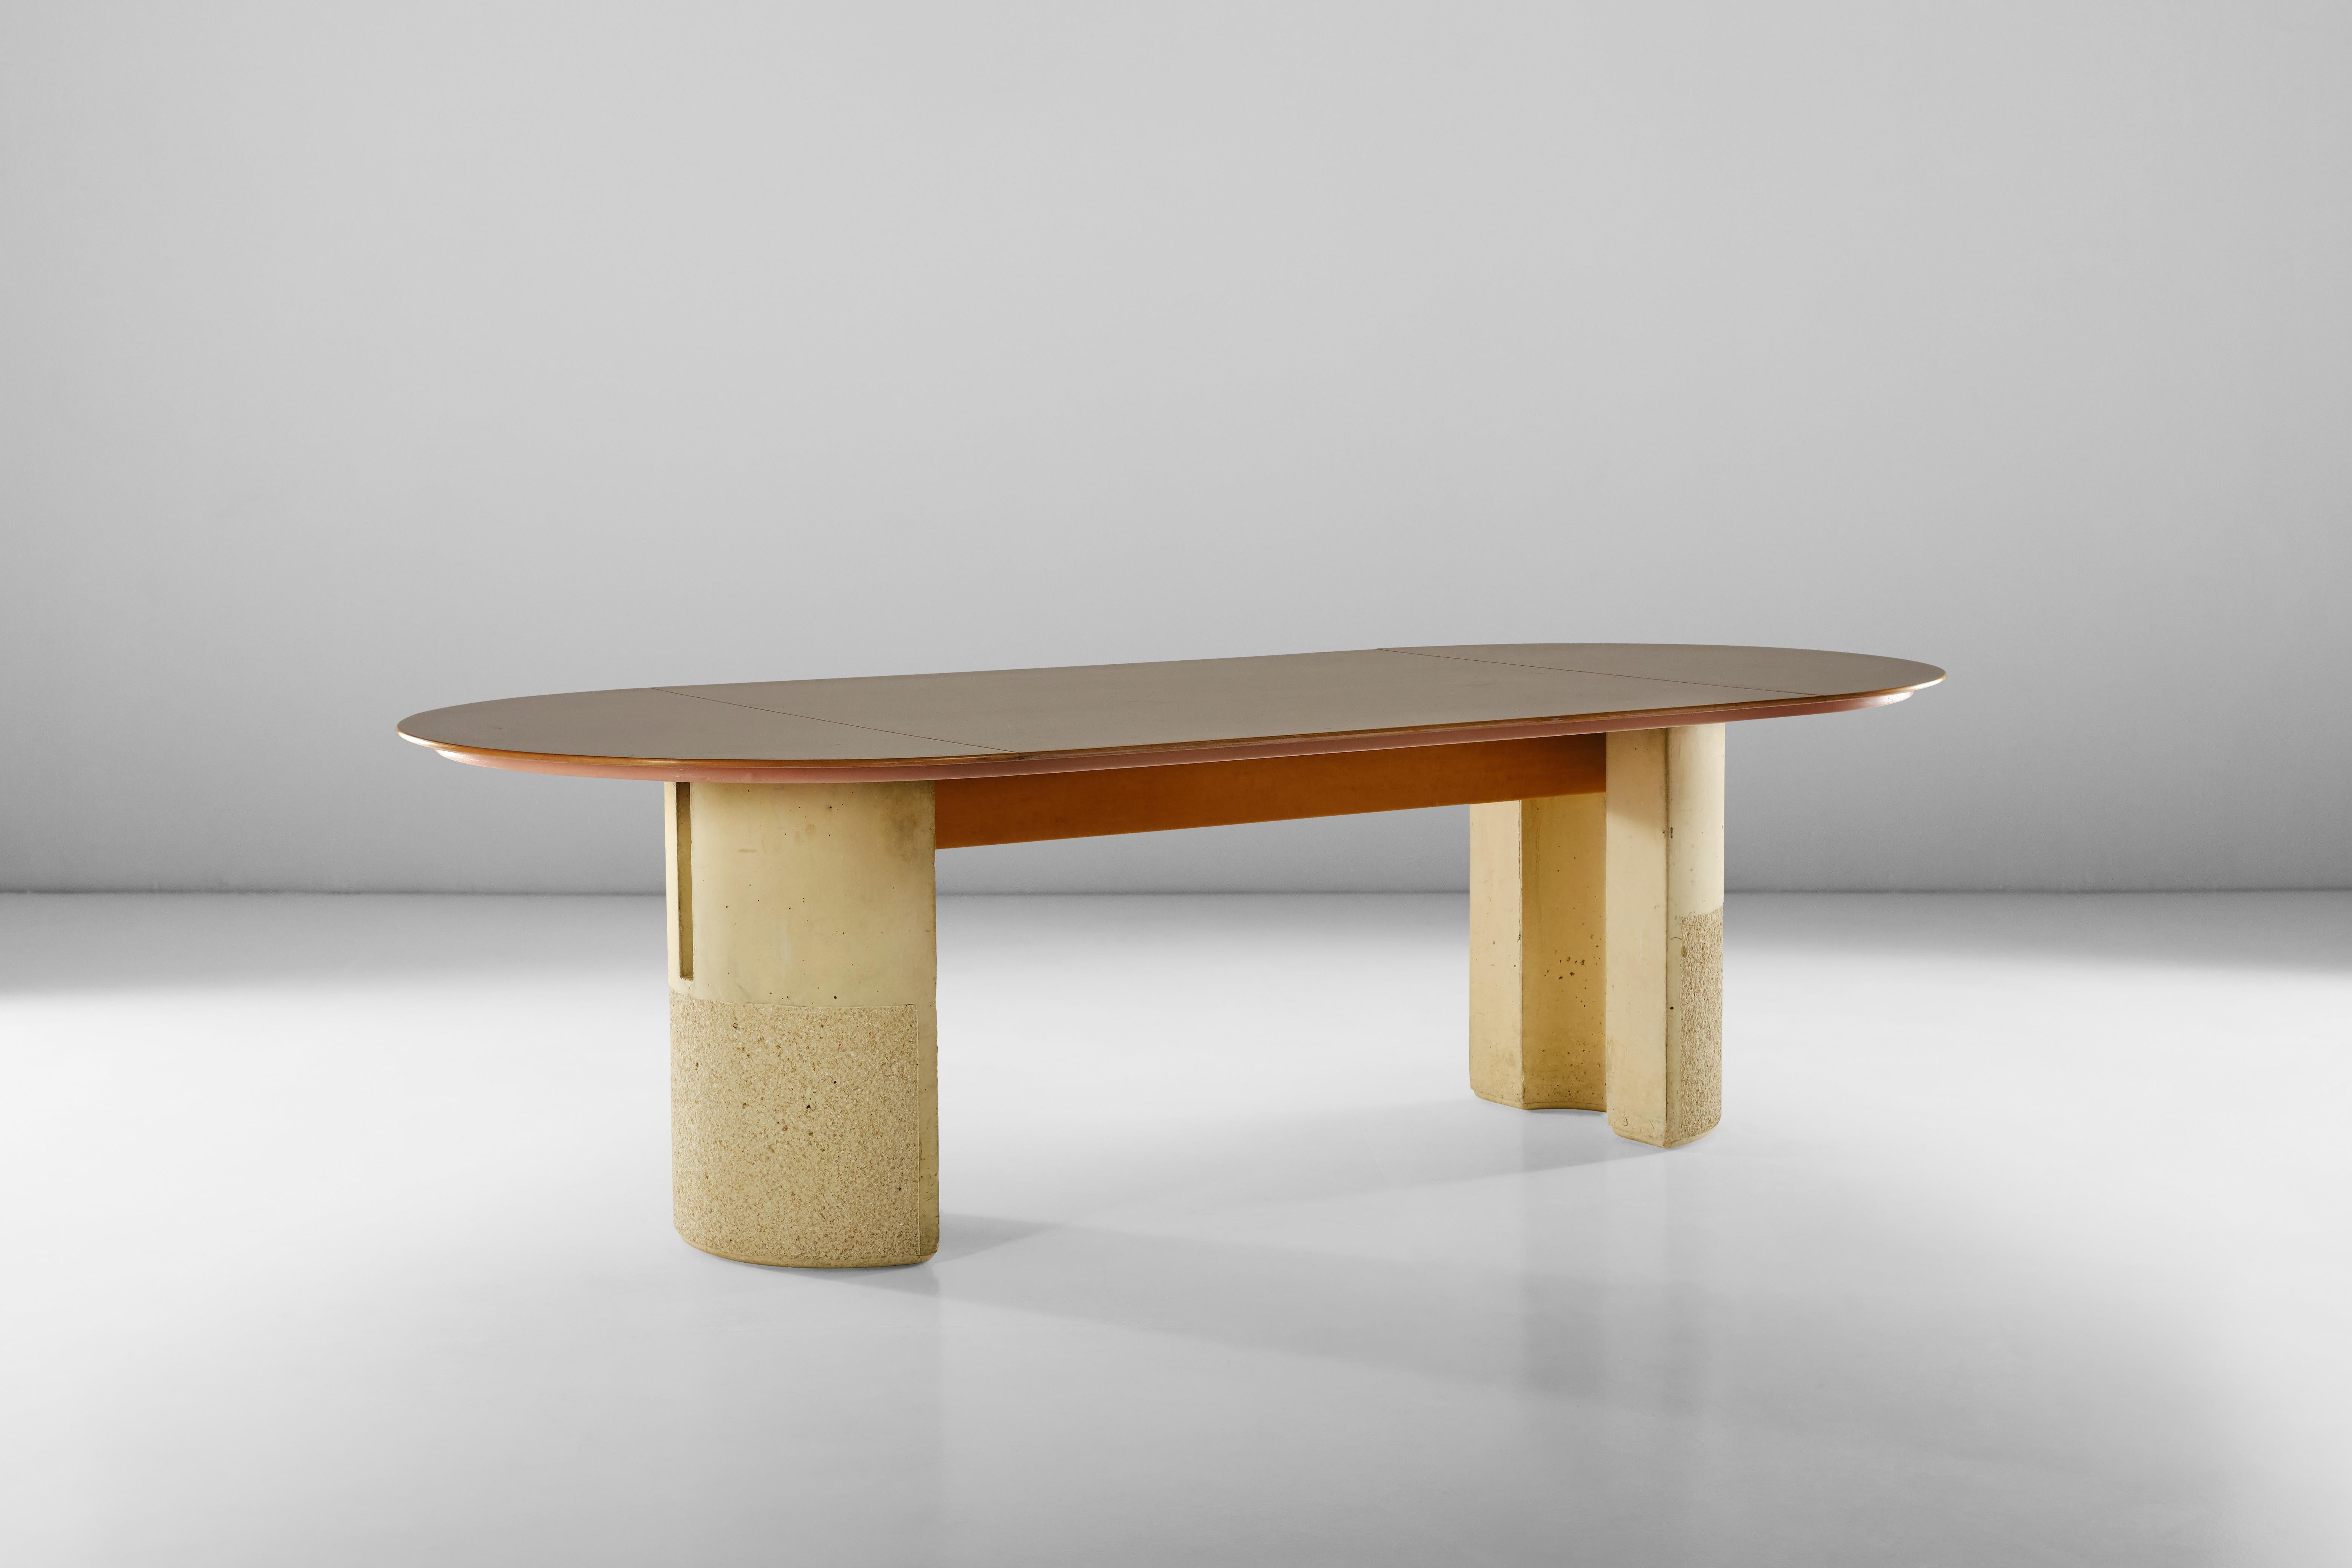 This awesome table with concrete legs and wooden top was designed by Giovanni Offredi per Saporiti in the 90s.
By balancing perfectly the sculptural feeling of the concrete with the warm tones of the wood, this table matches perfectly with